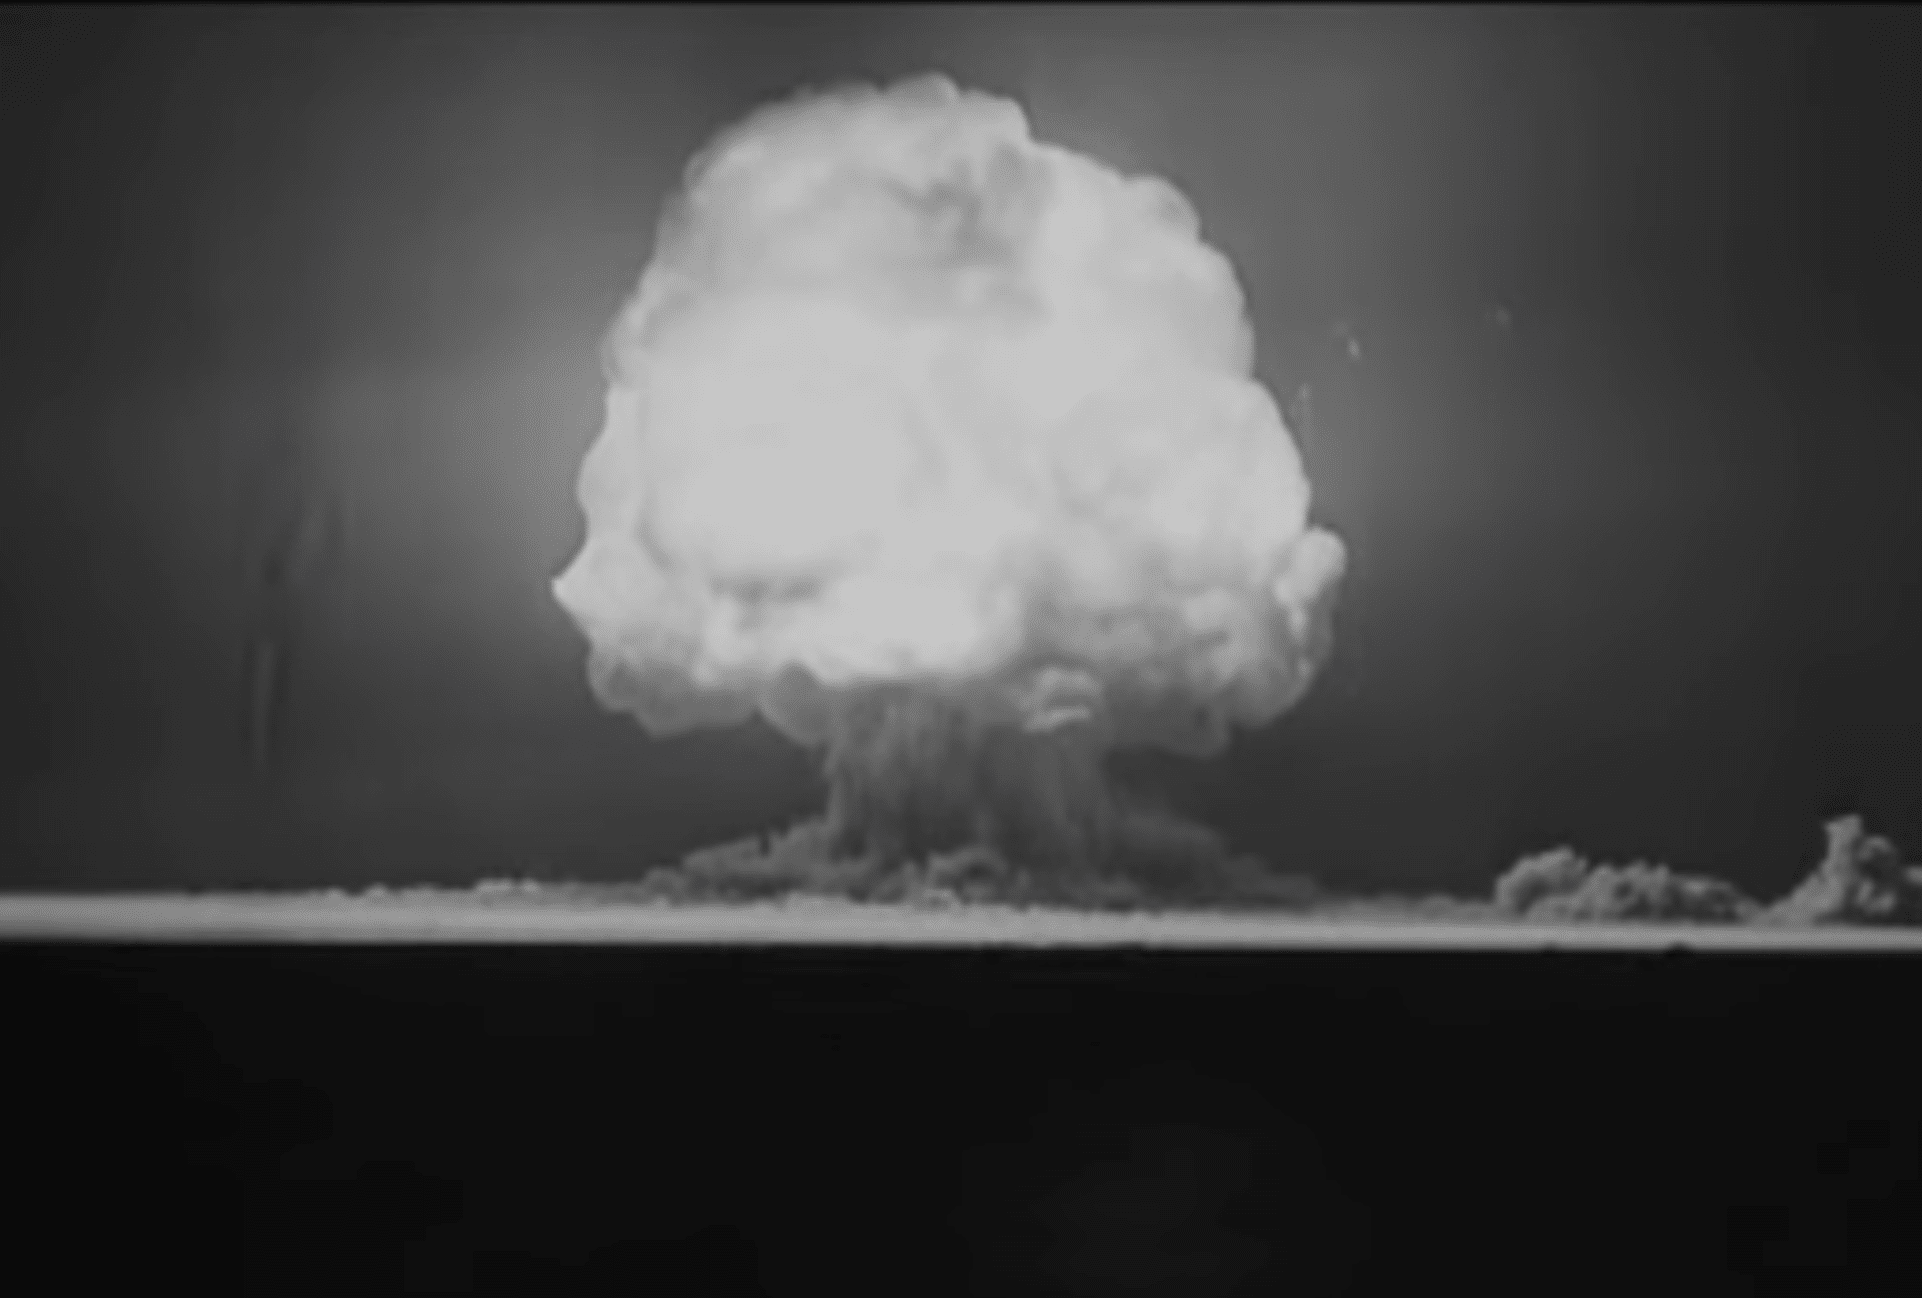 Trinity The Most Significant Hazard Of The Entire Manhattan Project